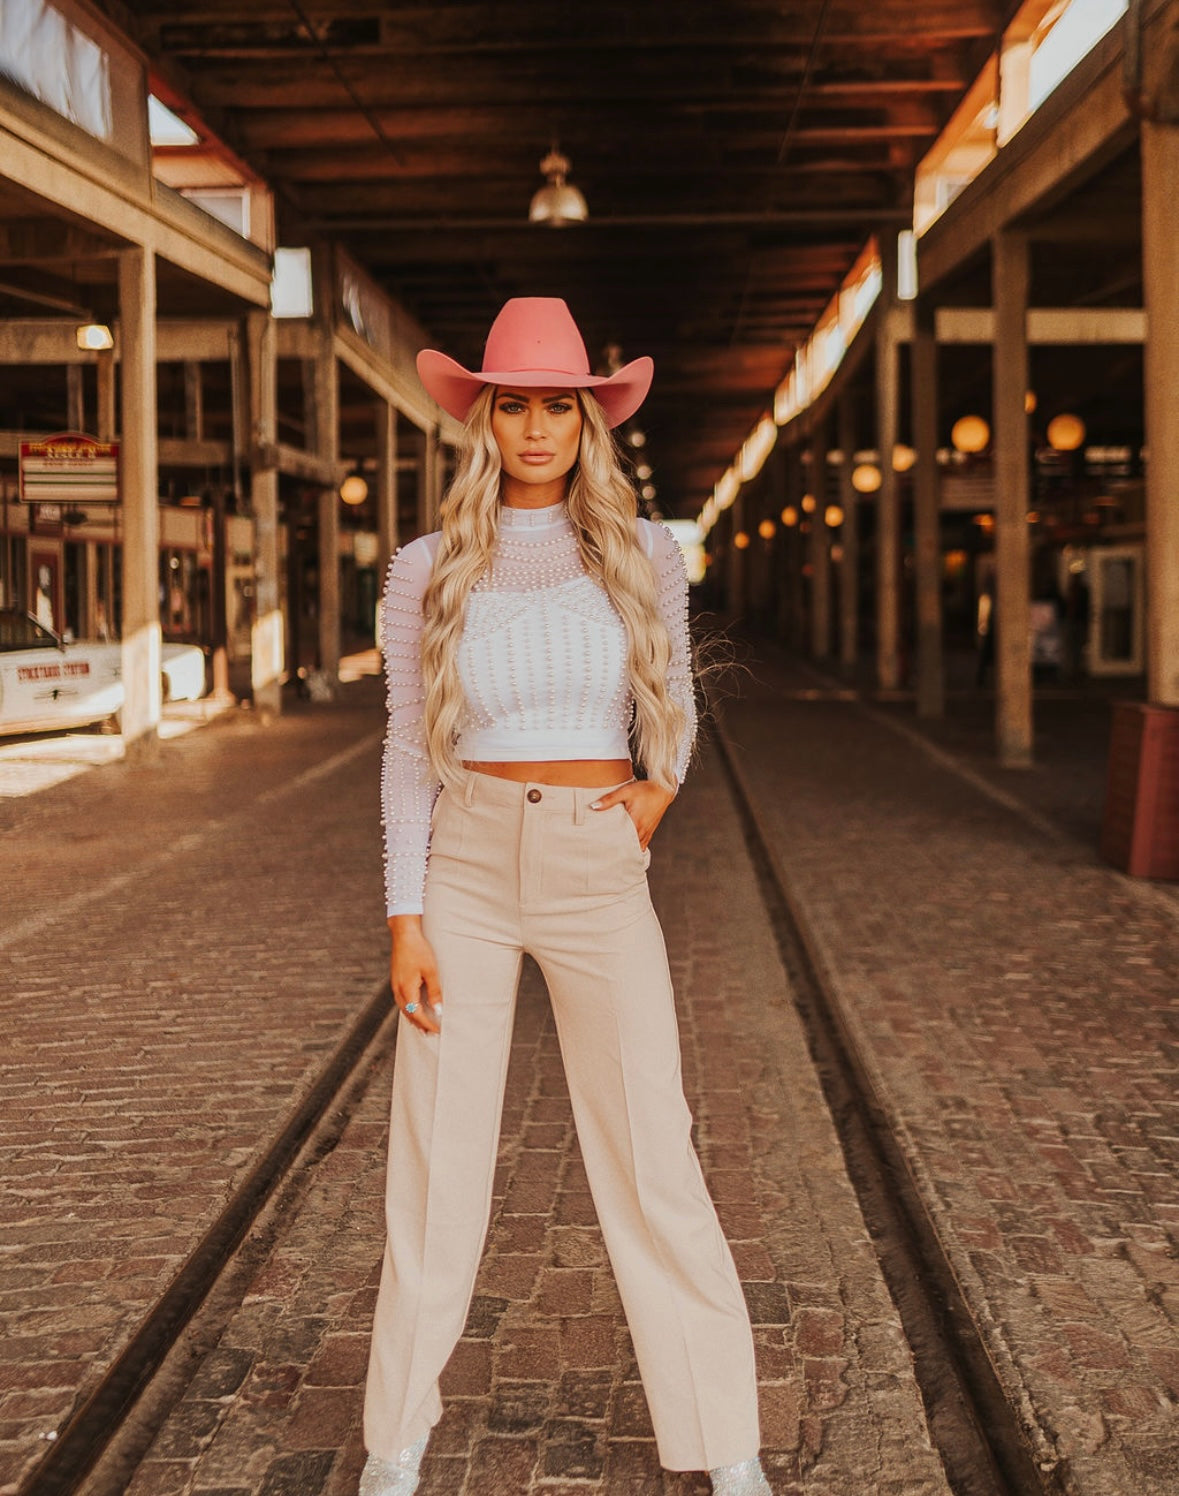 ALL BUSINESS COWGIRL TAN PANTS